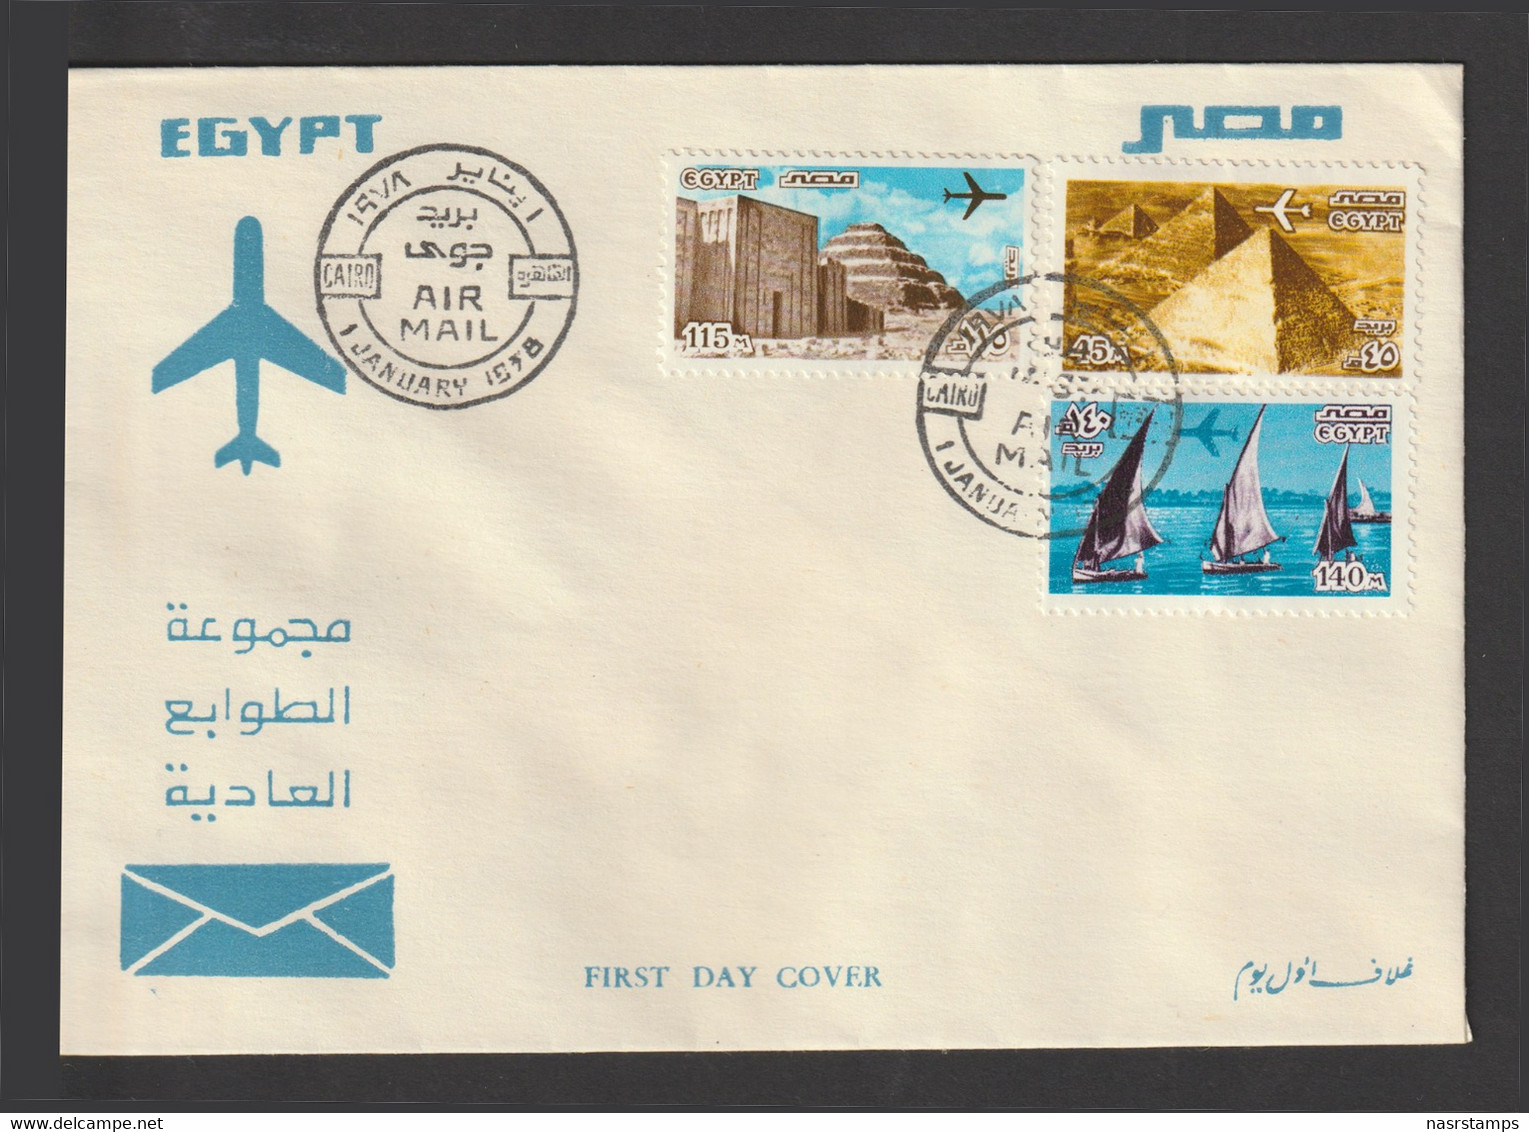 Egypt - 1978-82 - RARE - FDC - Air Mail - Landmark Of Egypt - Covers & Documents